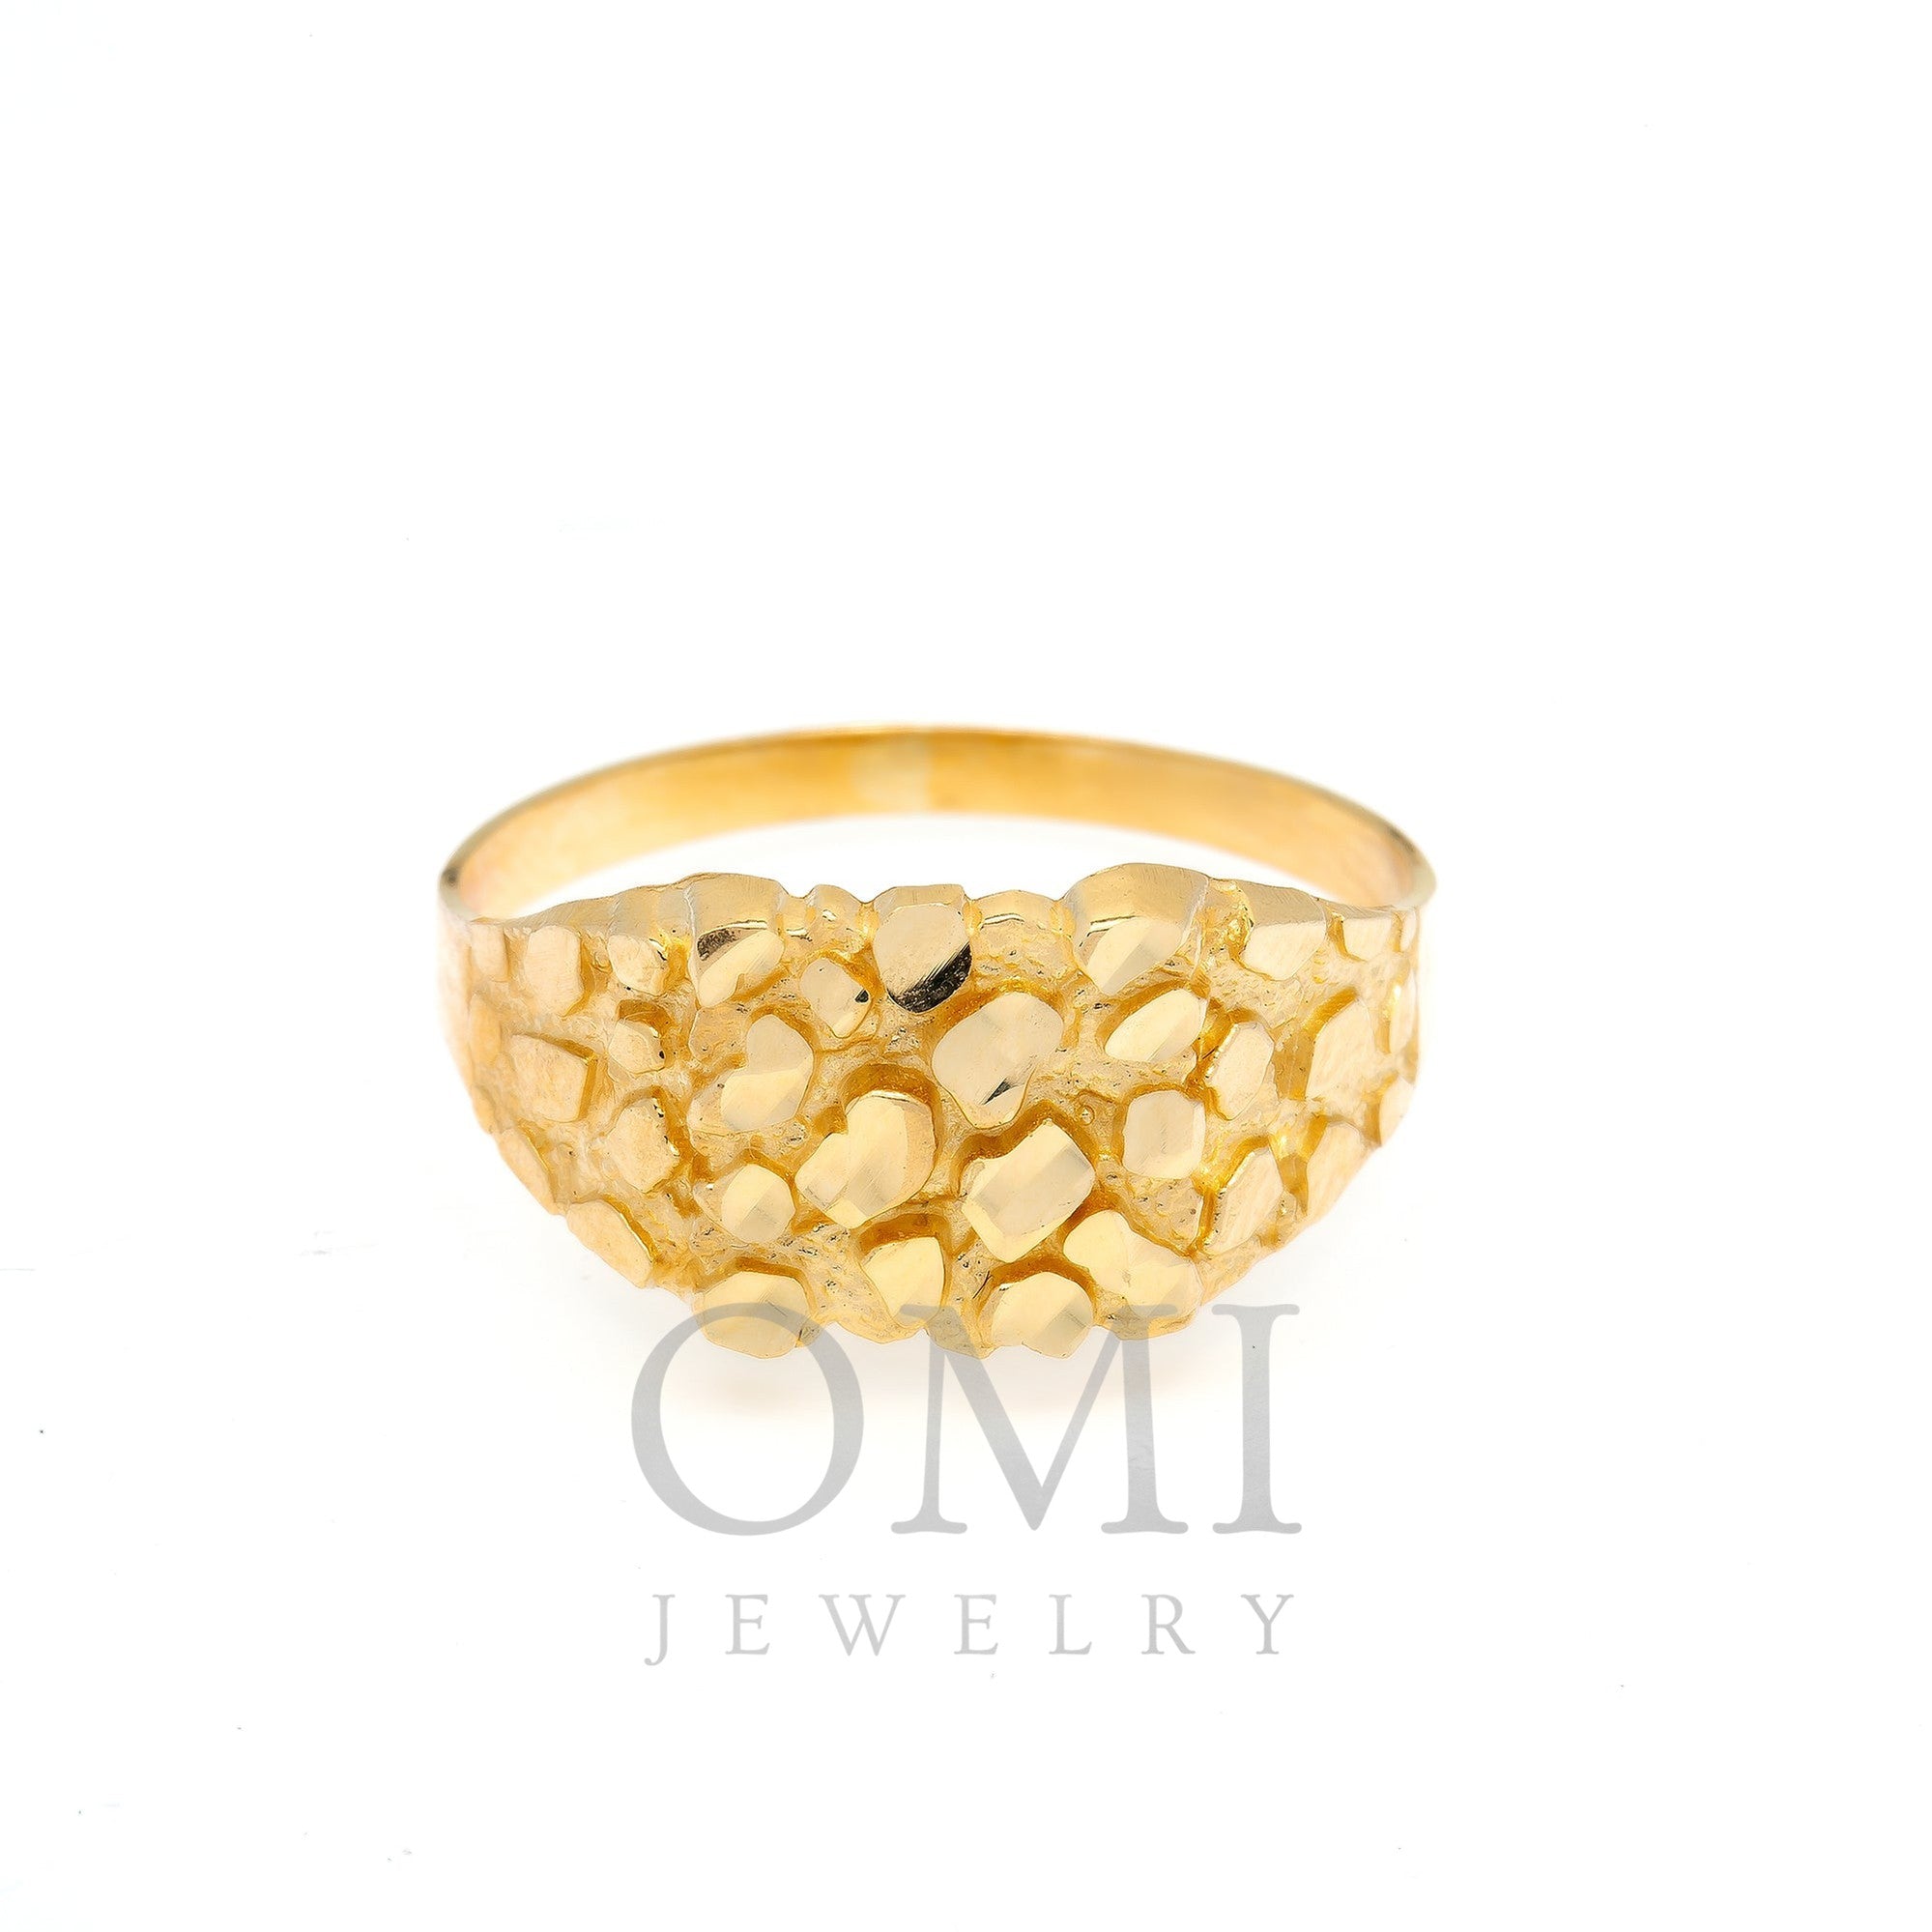 2.5 Inch Gold Metal Rings for Crafts Bulk 10 Pieces